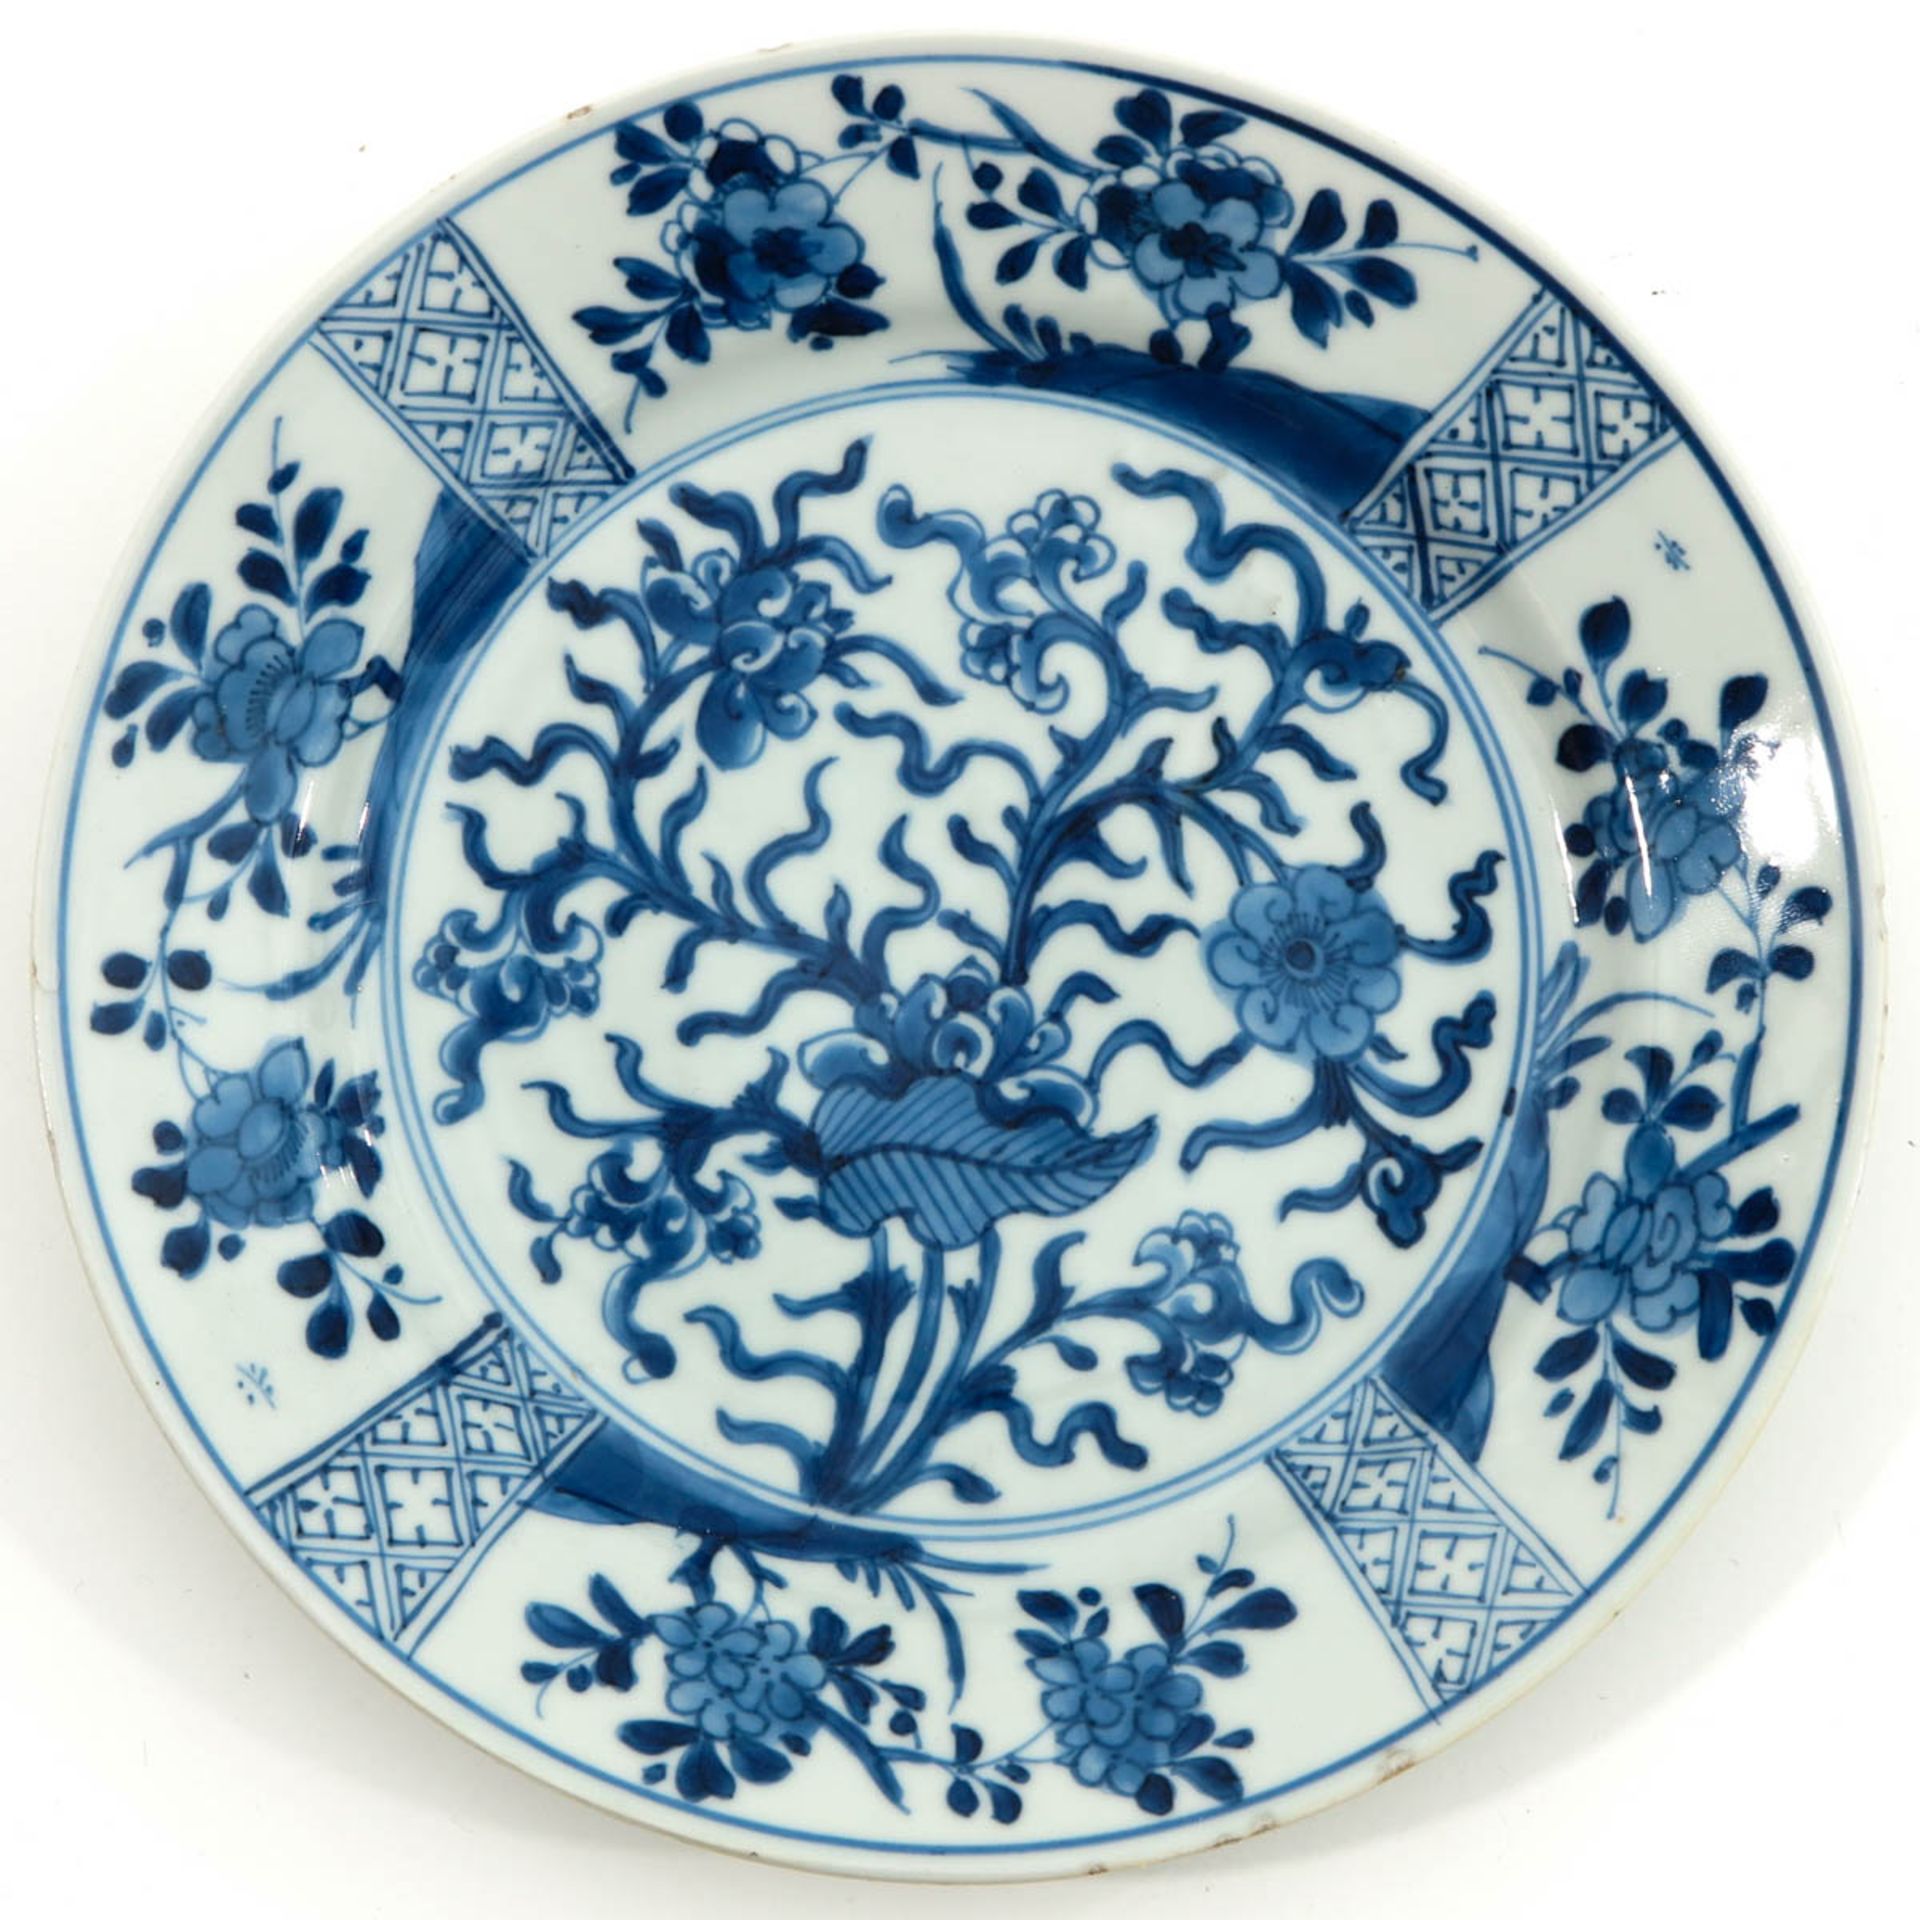 A Series of 3 Blue and White Plates - Bild 3 aus 10